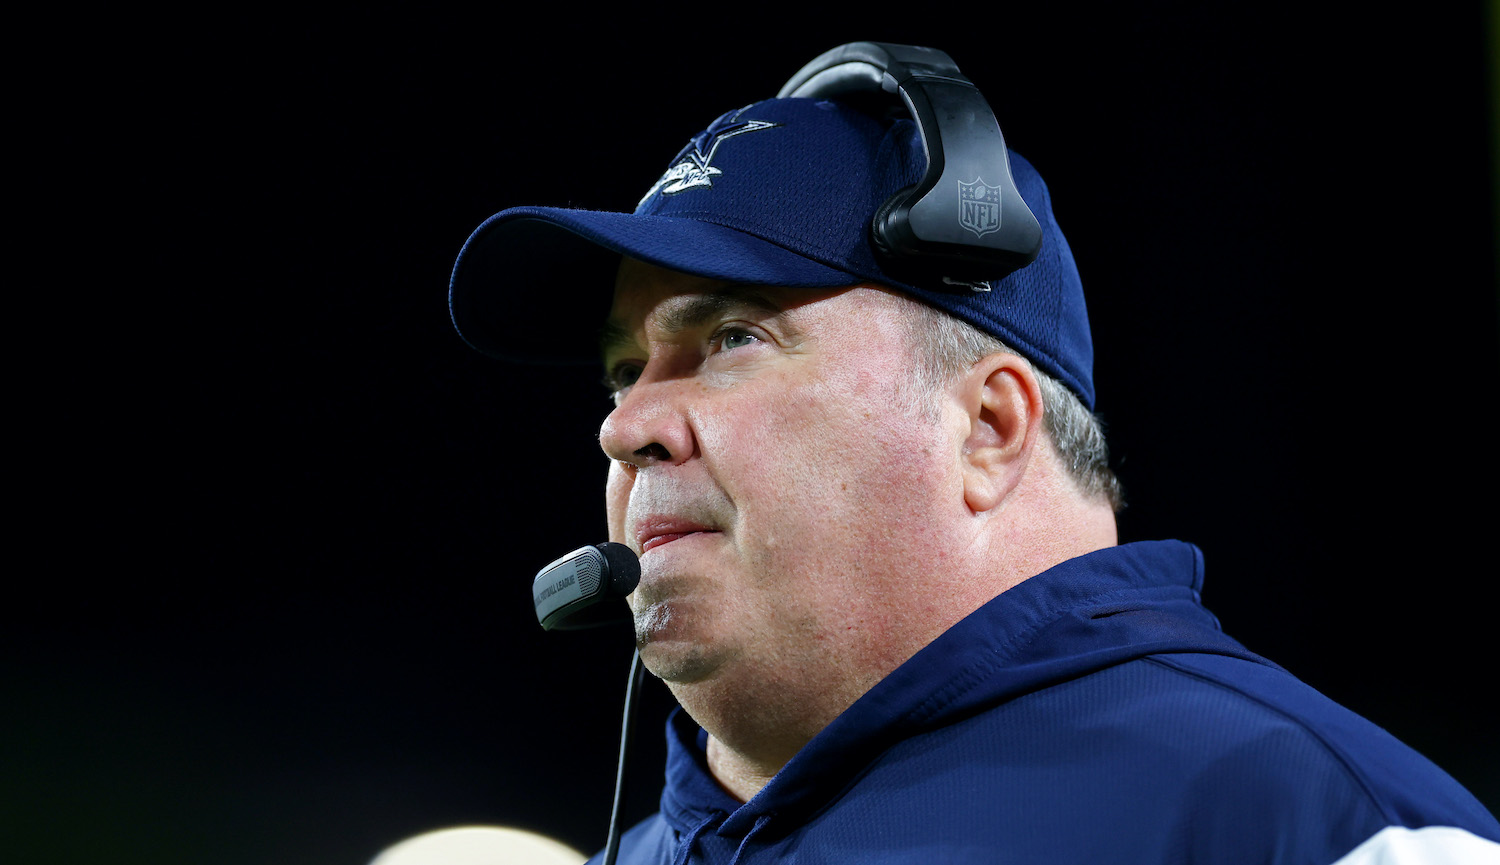 TAMPA, FLORIDA - JANUARY 16: Head coach Mike McCarthy of the Dallas Cowboys looks on against the Tampa Bay Buccaneers during the first quarter in the NFC Wild Card playoff game at Raymond James Stadium on January 16, 2023 in Tampa, Florida. (Photo by Mike Ehrmann/Getty Images)